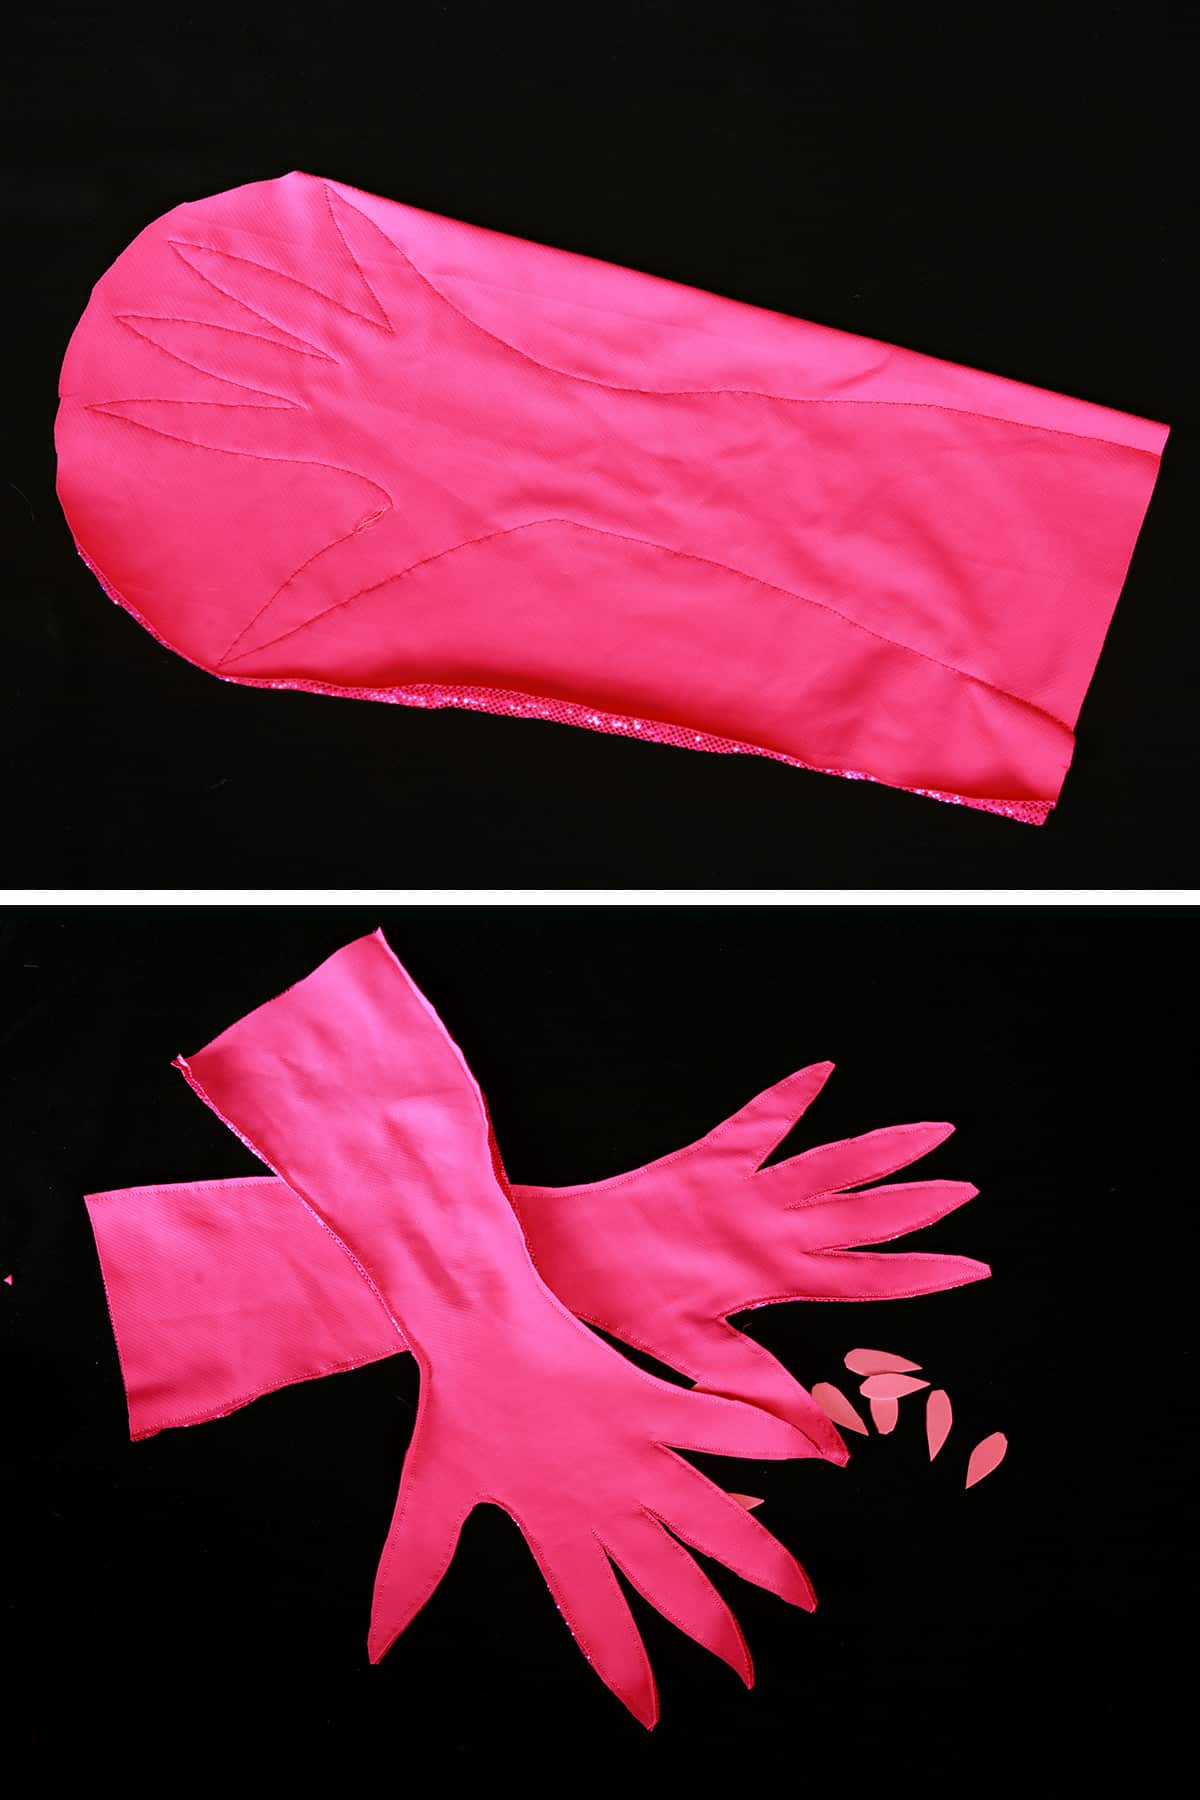 A two part compilation image showing the glove sewn into a piece of fabric, and two gloves after trimming.